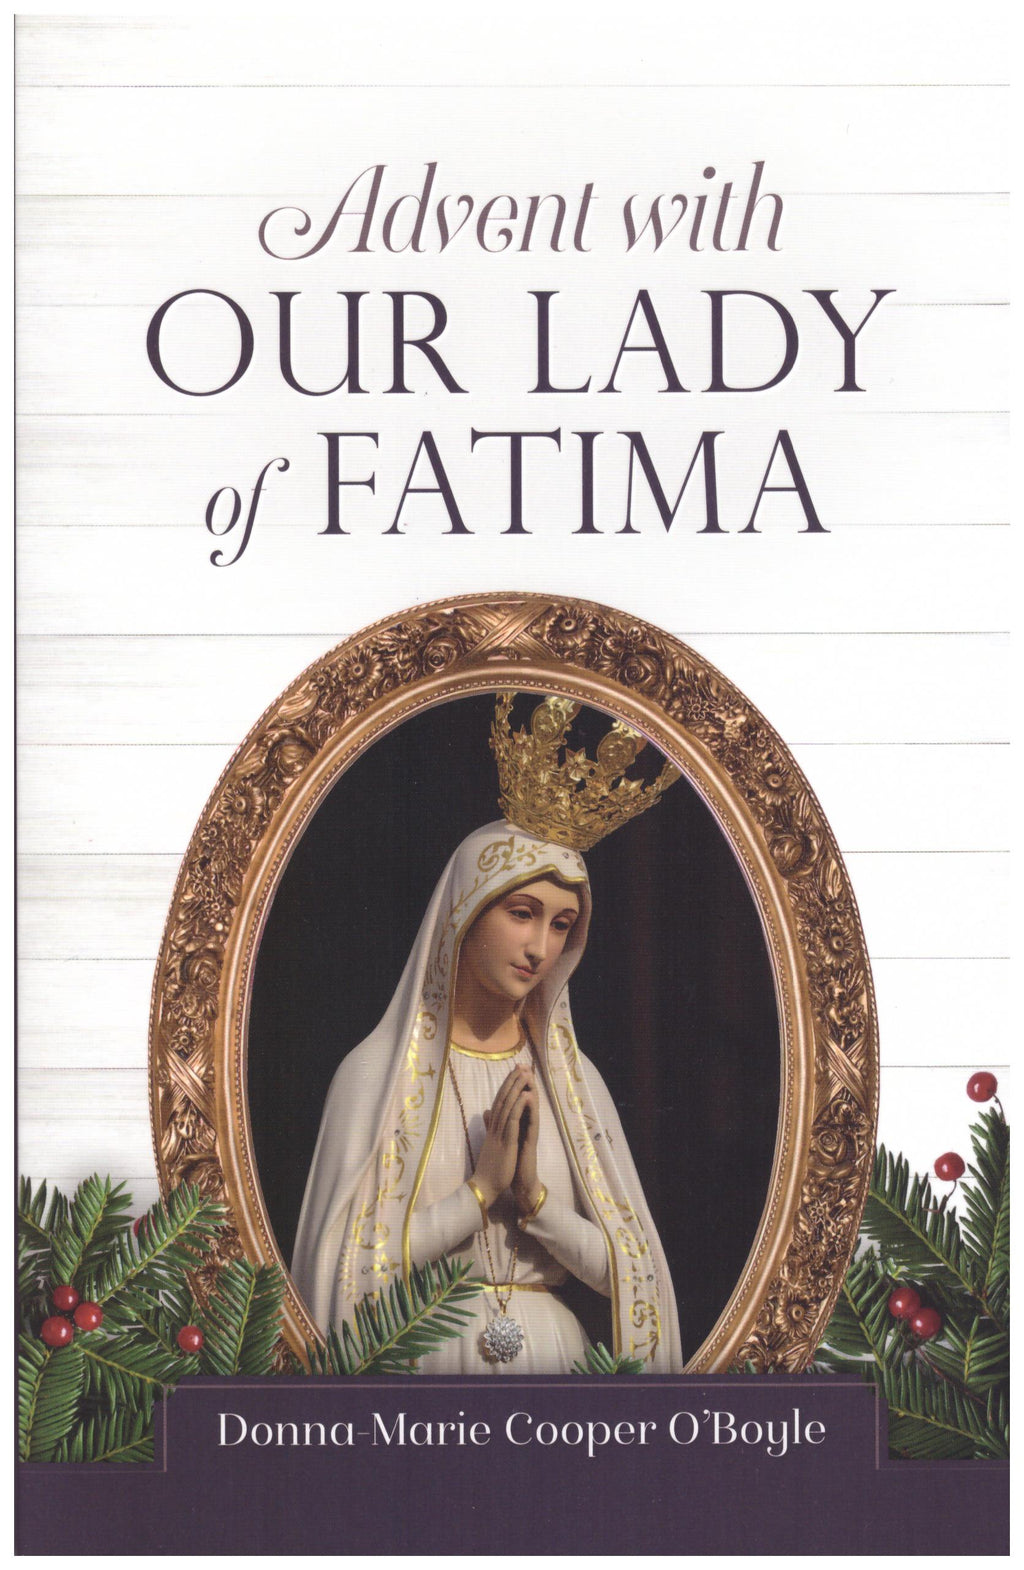 ADVENT WITH OUR LADY OF FATIMA